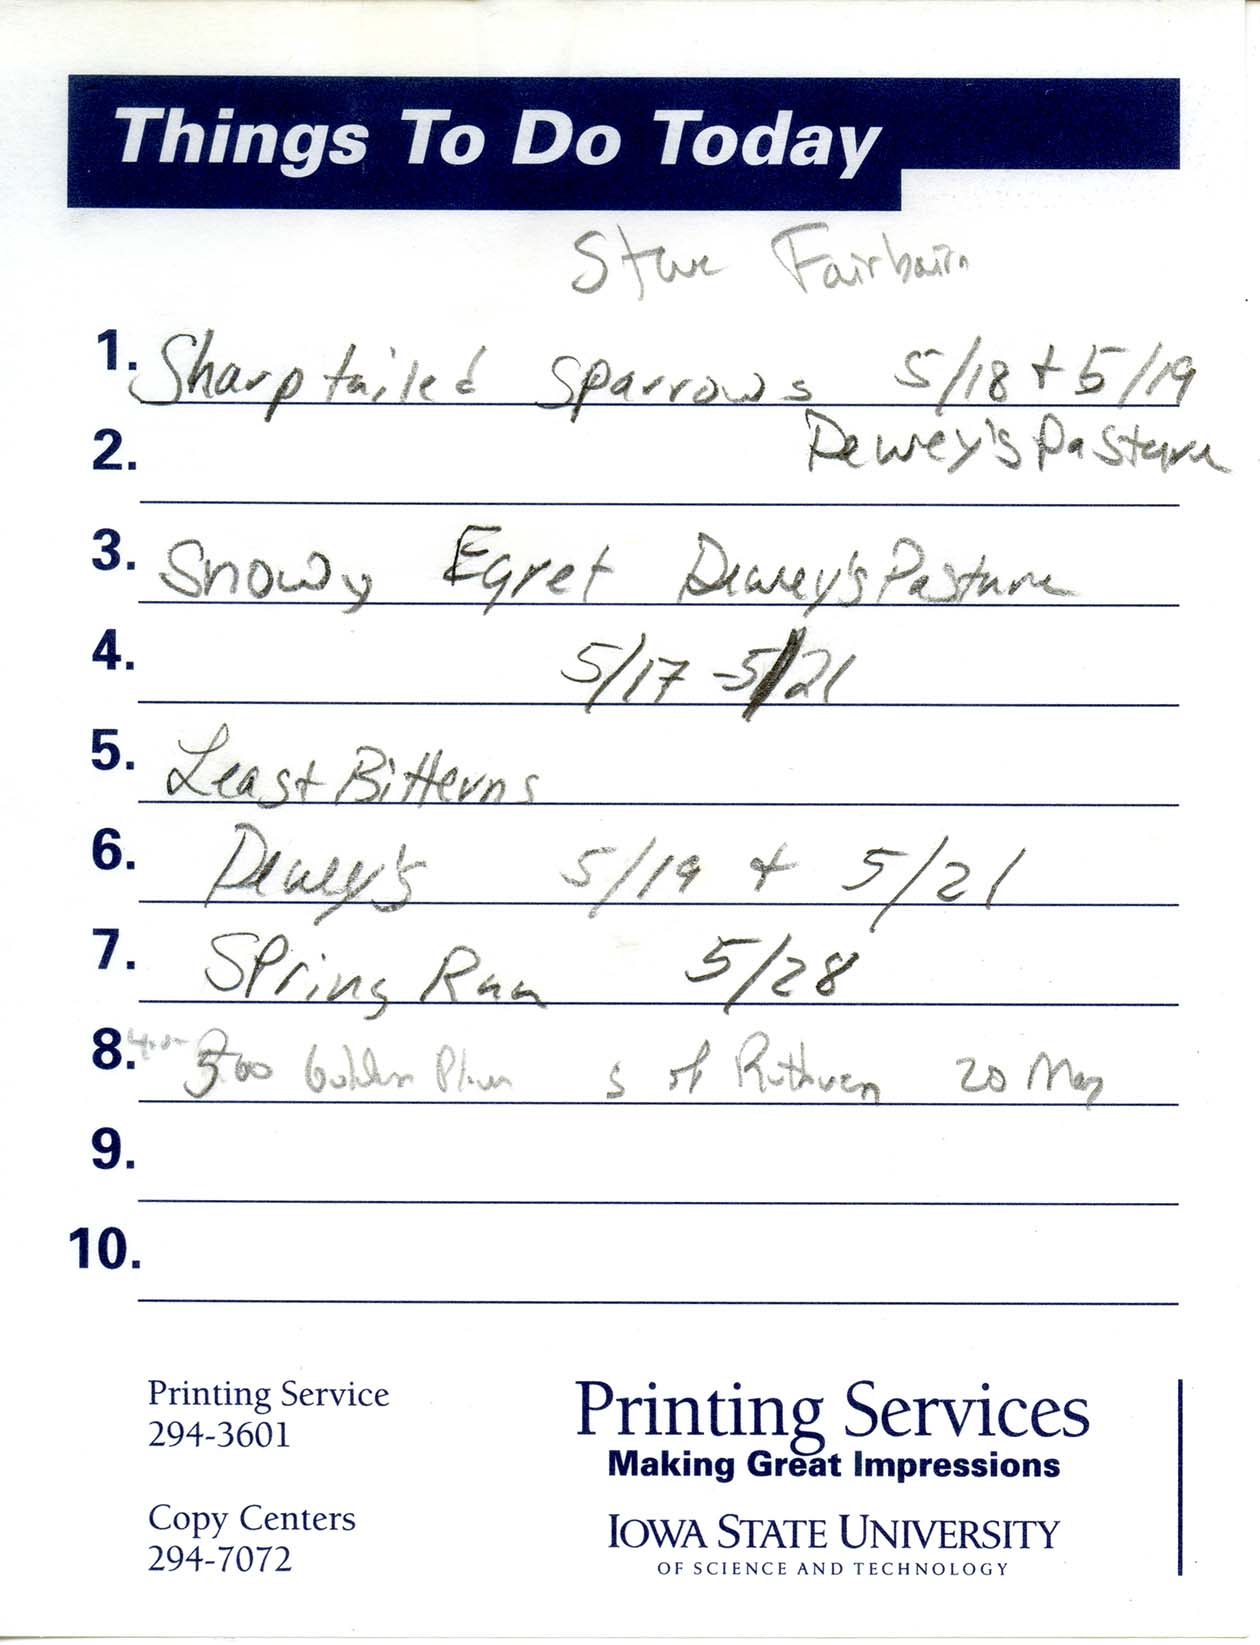 Field notes contributed by Steve E. Fairbairn, spring 1997